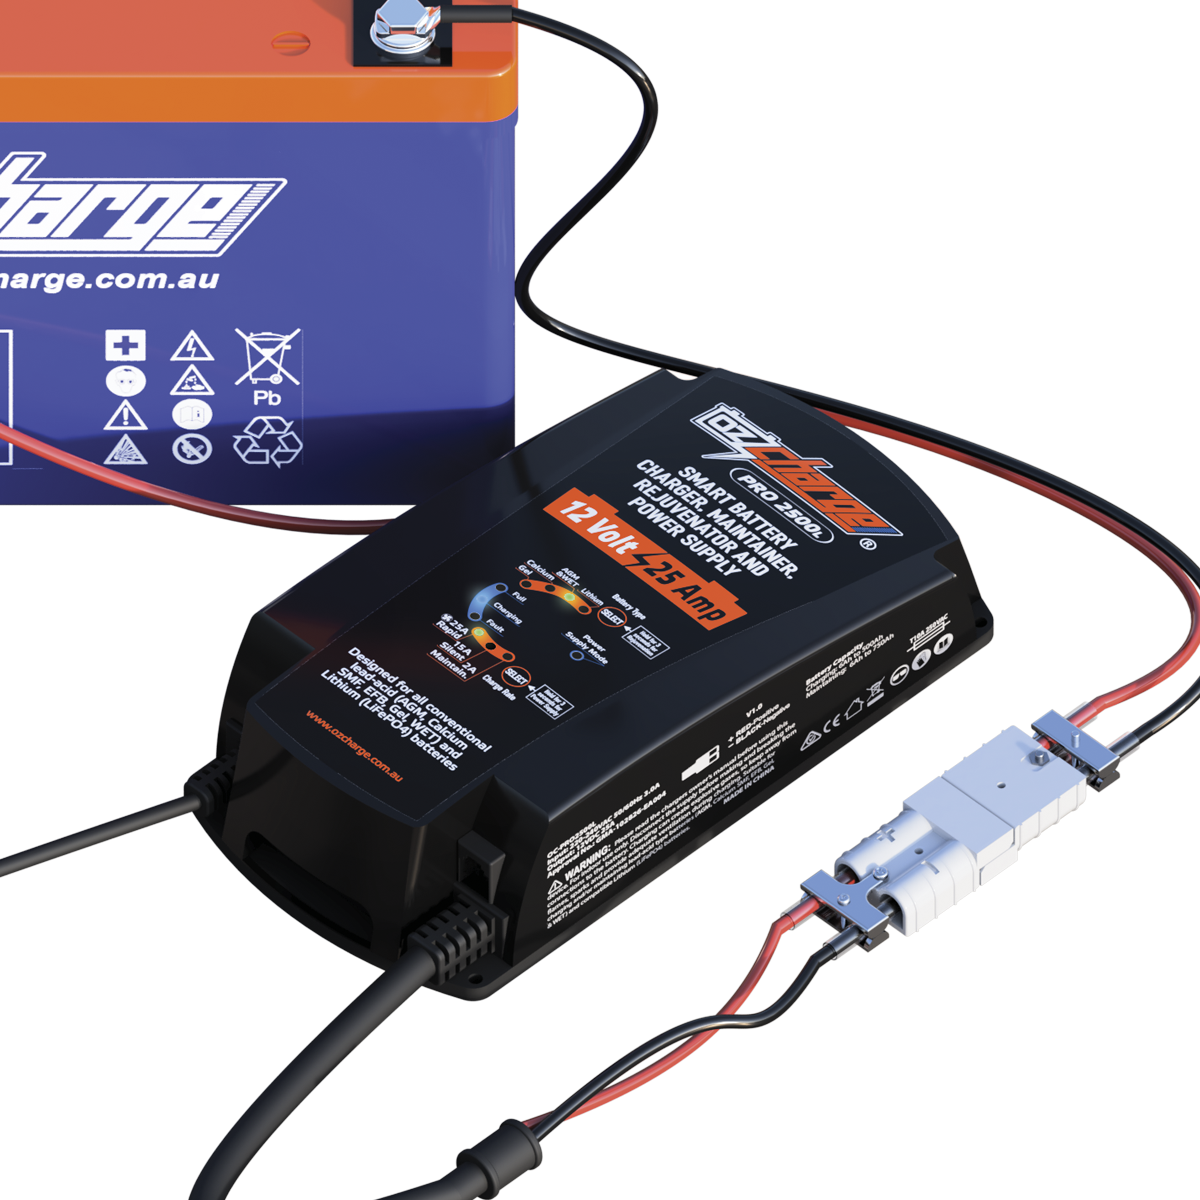 Battery Charger vs Battery Maintainer: What's the Difference